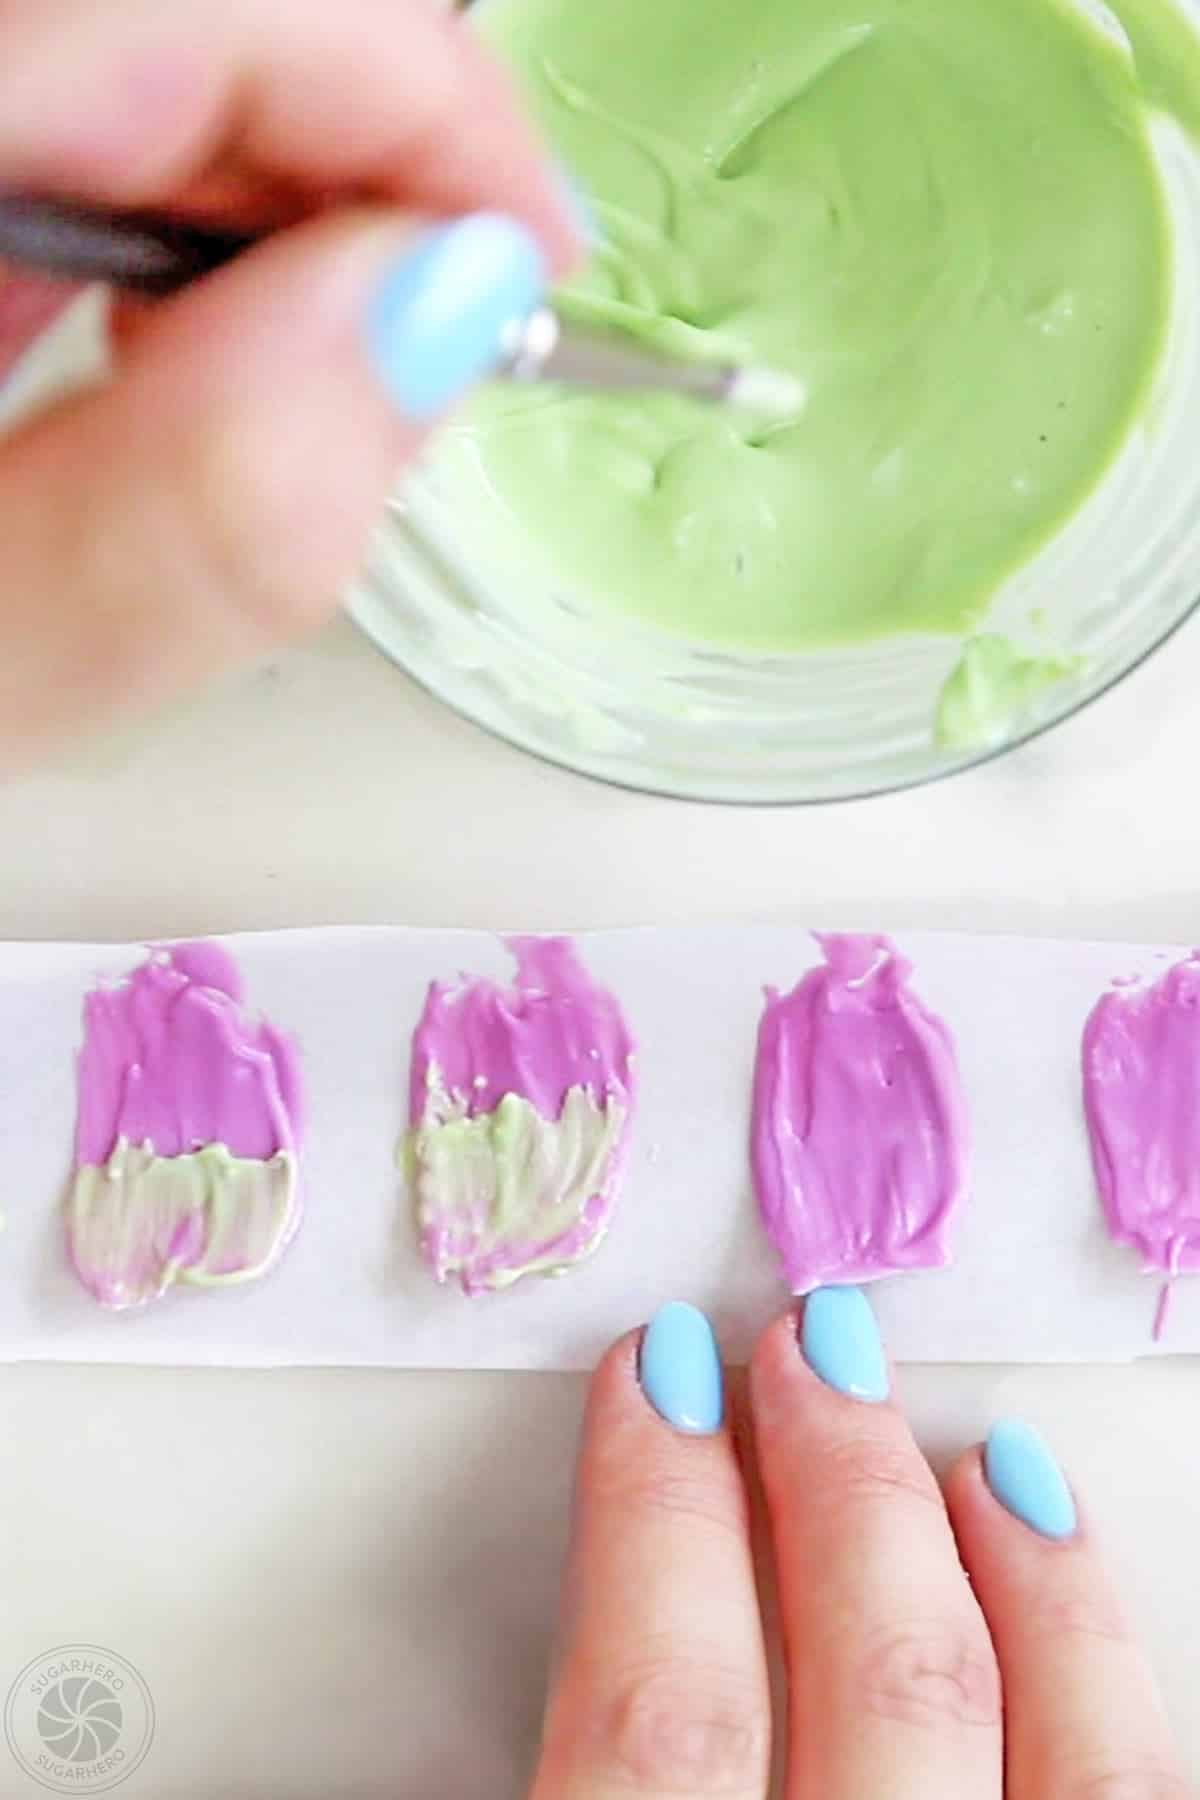 Brushing green candy melt accents on purple candy melt petals.